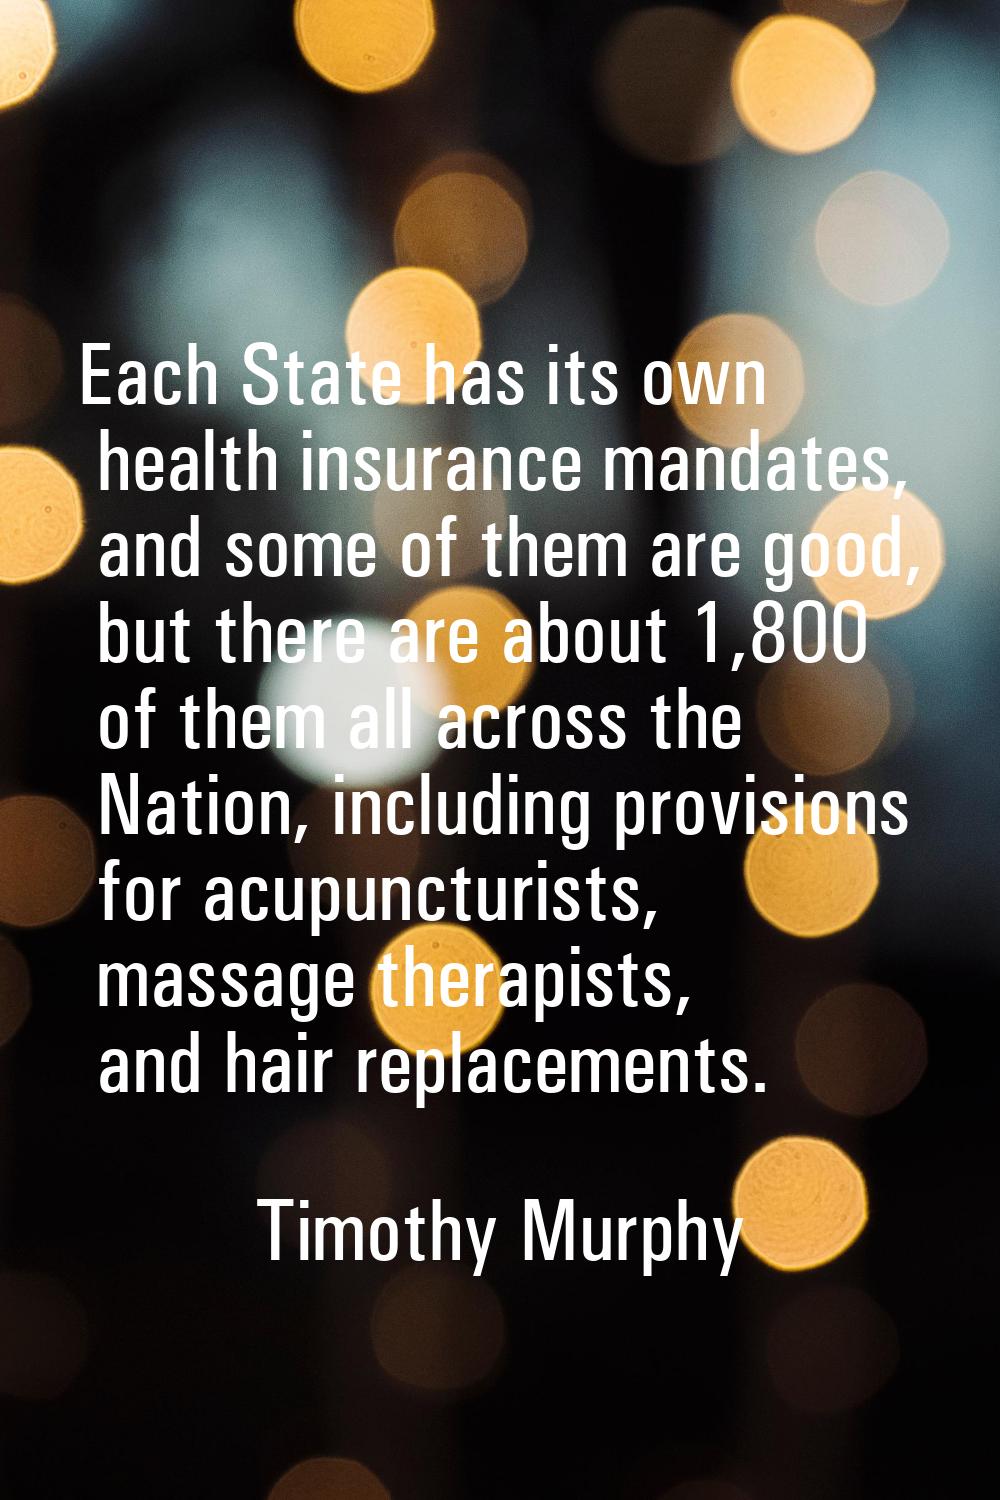 Each State has its own health insurance mandates, and some of them are good, but there are about 1,